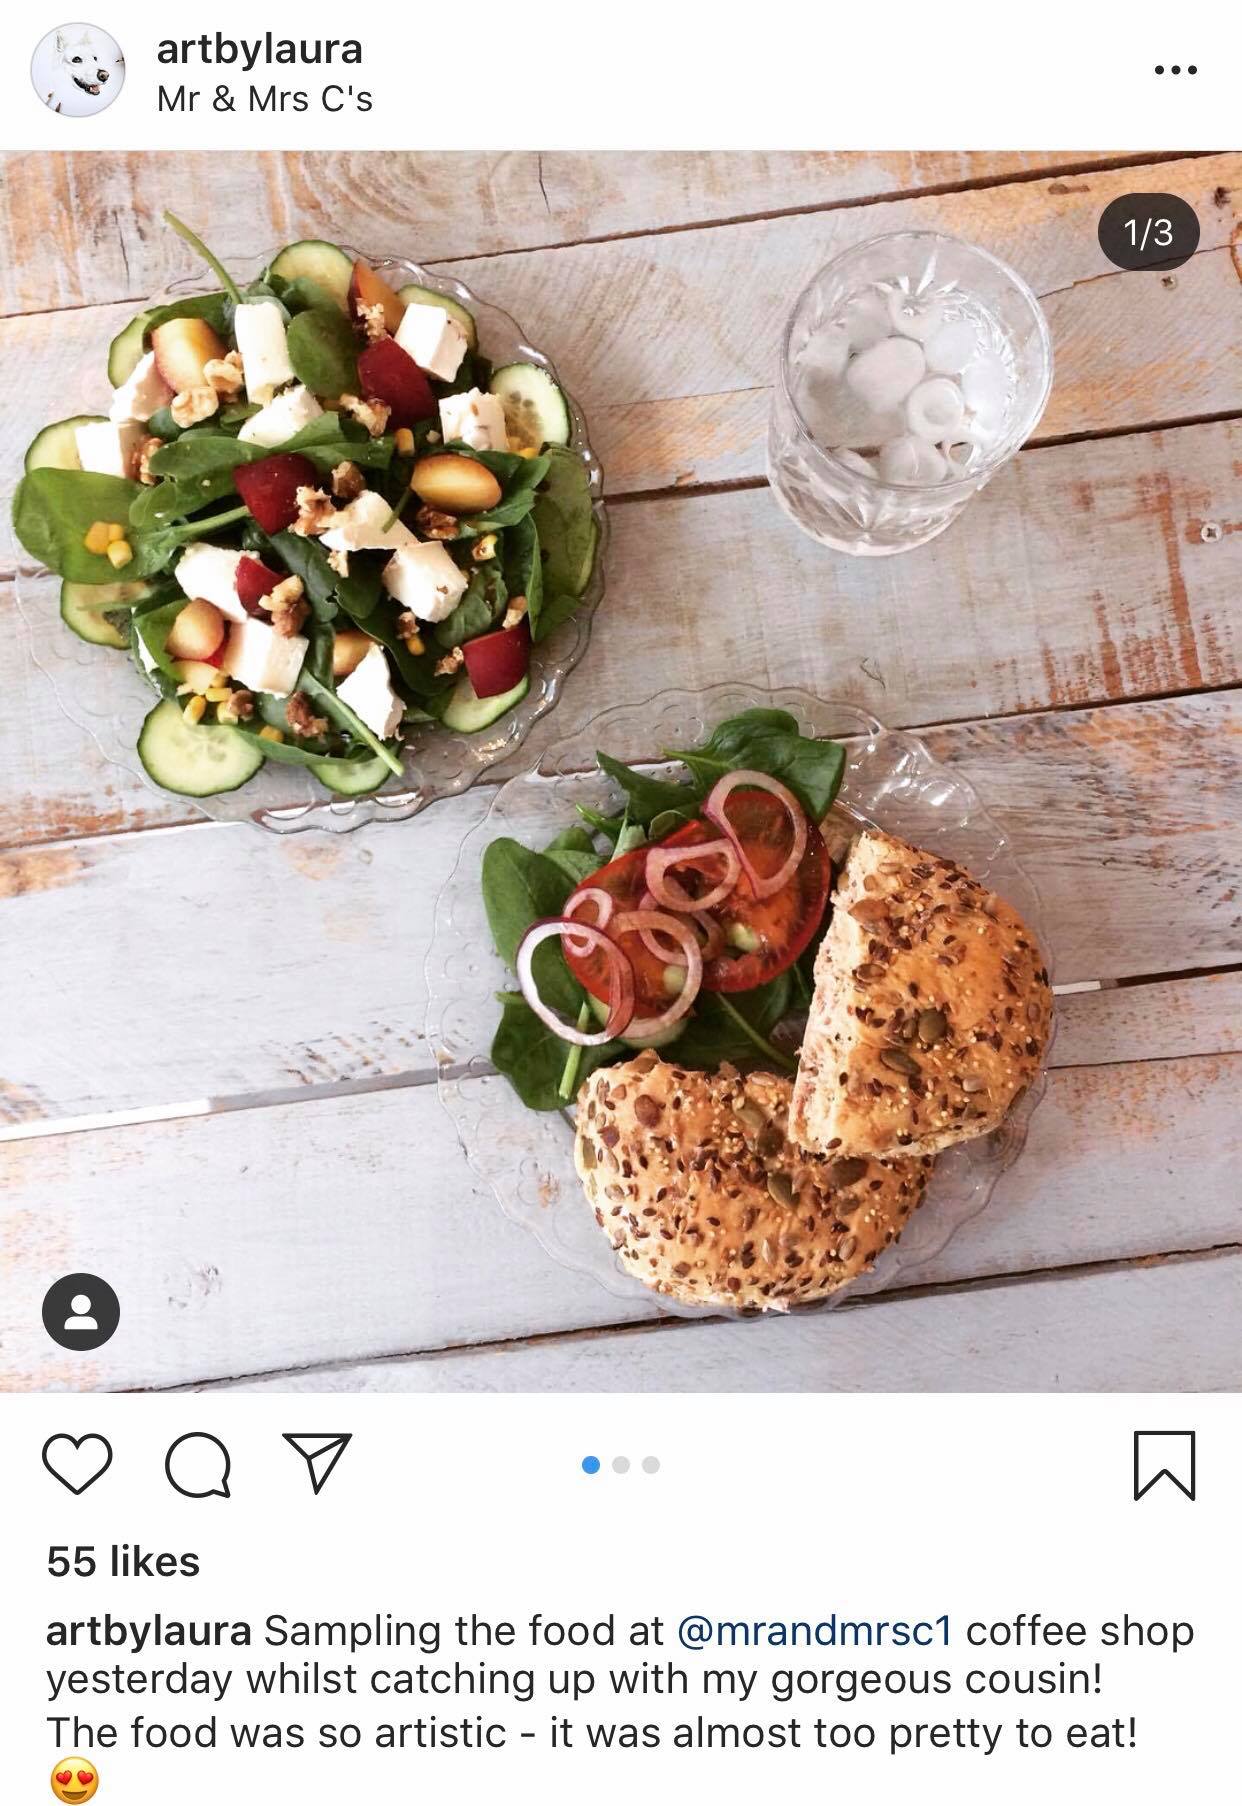 An instagram post of a sandwich and salad bought at the cafe by user @artbylaura.